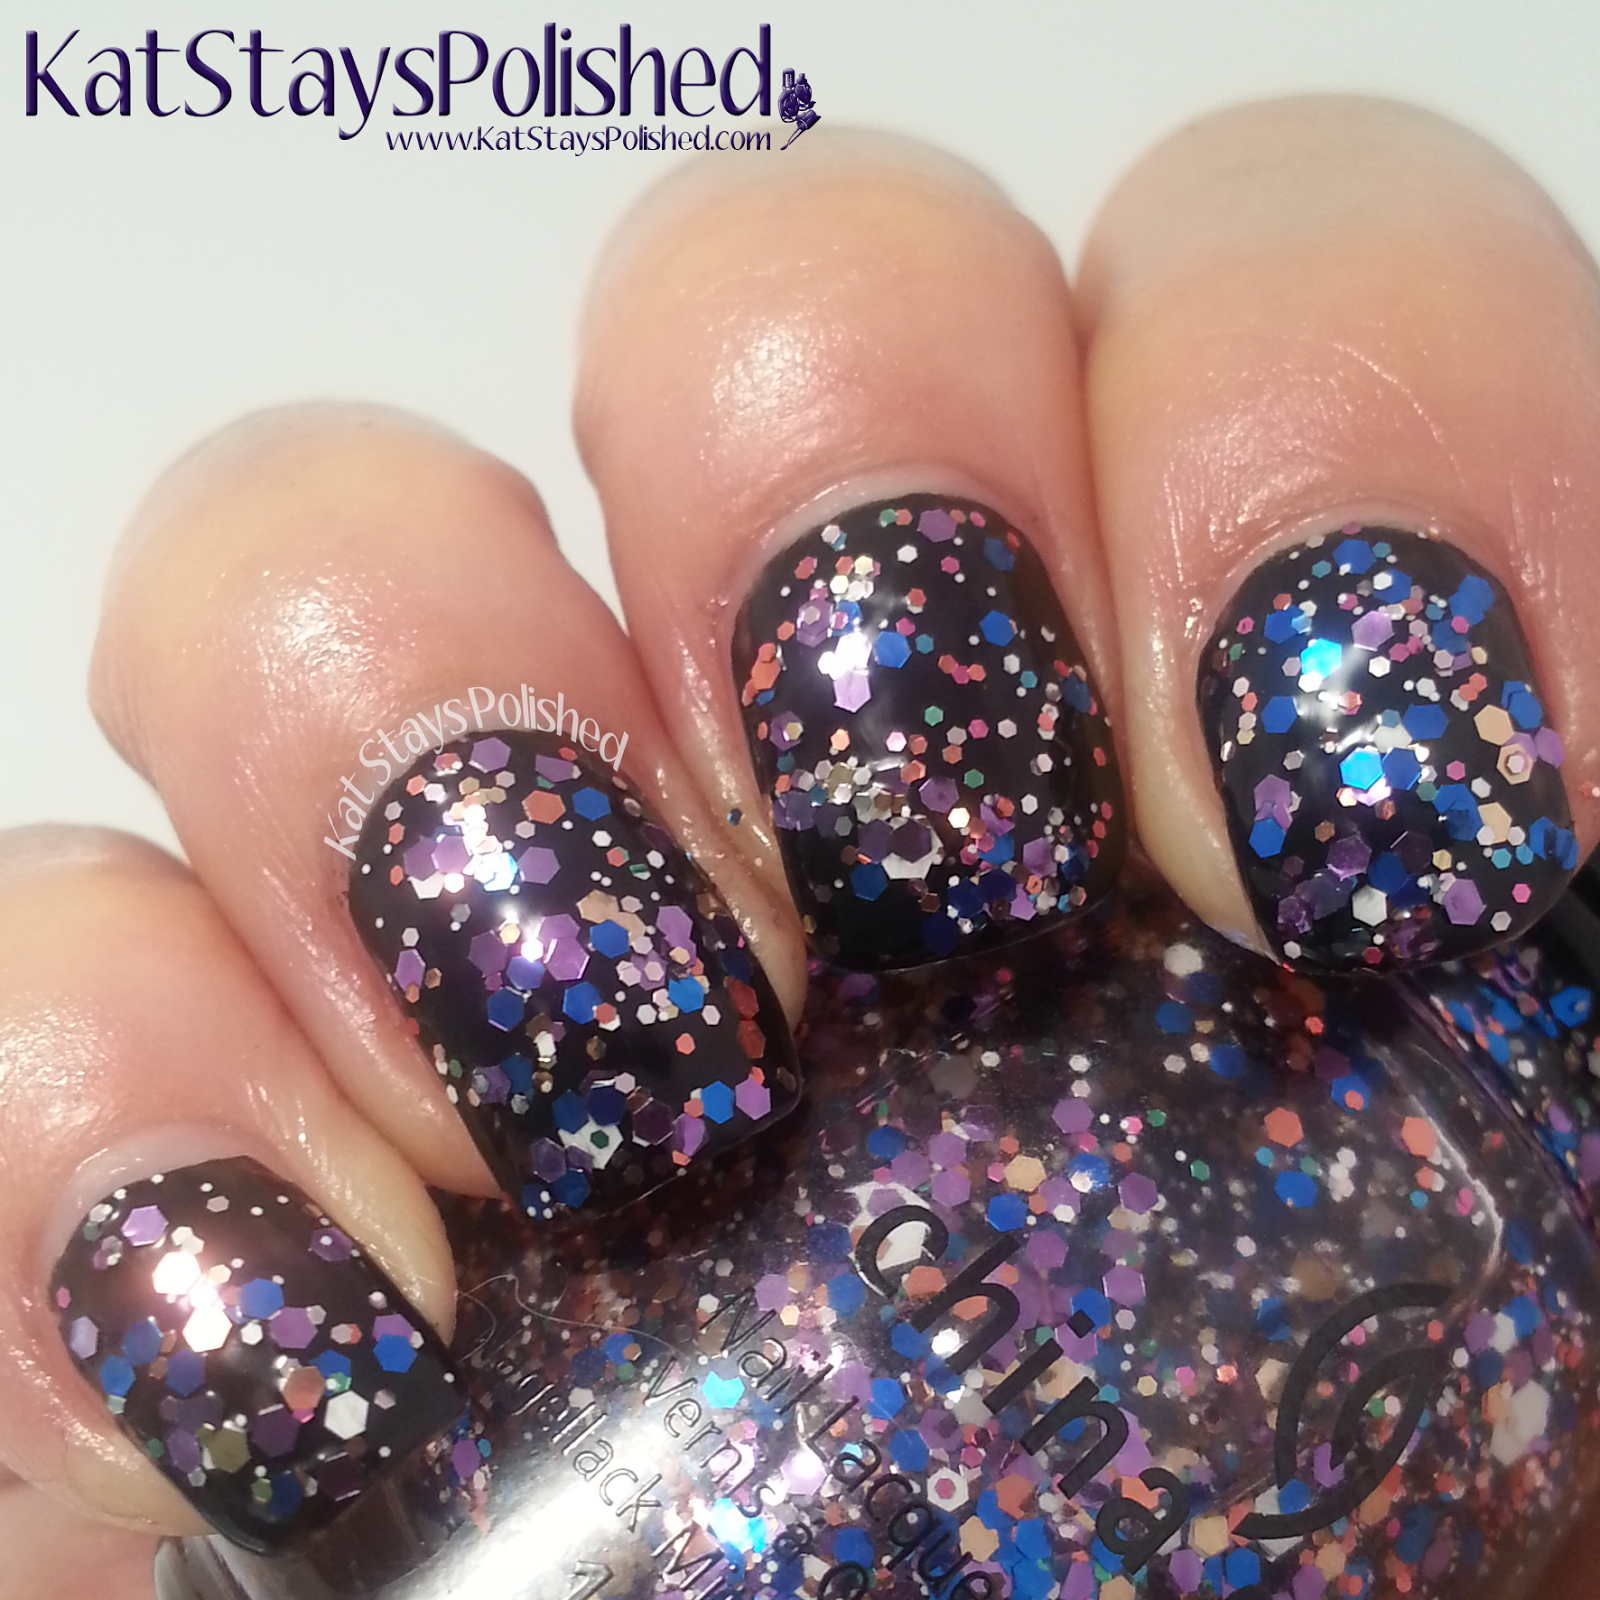 China Glaze Pop Top - Your Present Required | Kat Stays Polished